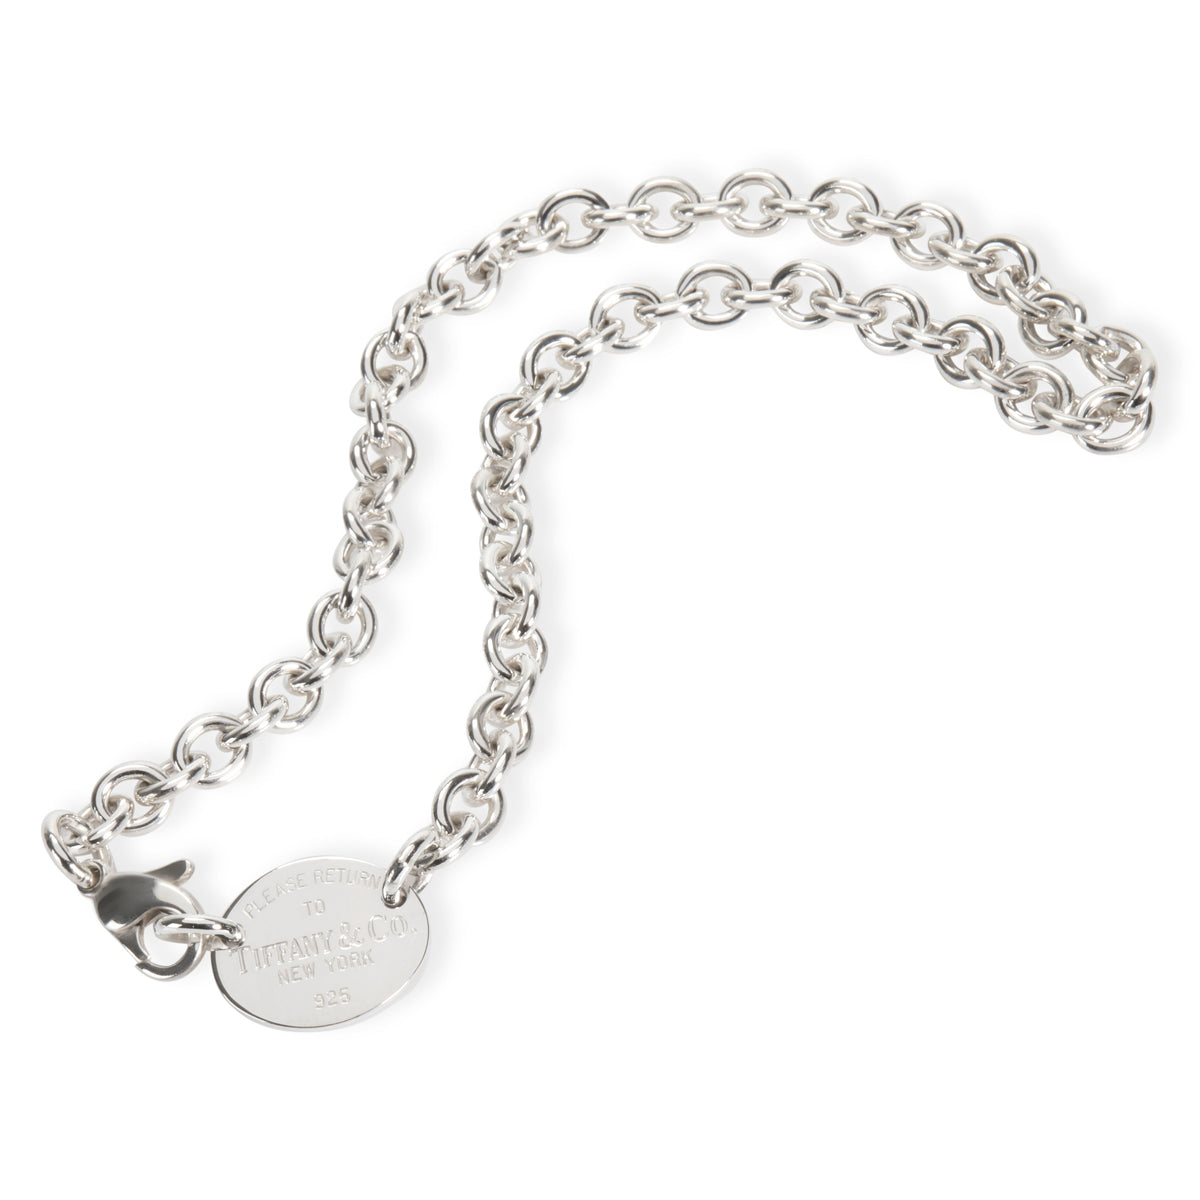 Tiffany & Co. Return to Tiffany Oval Tag Necklace in Sterling Silver